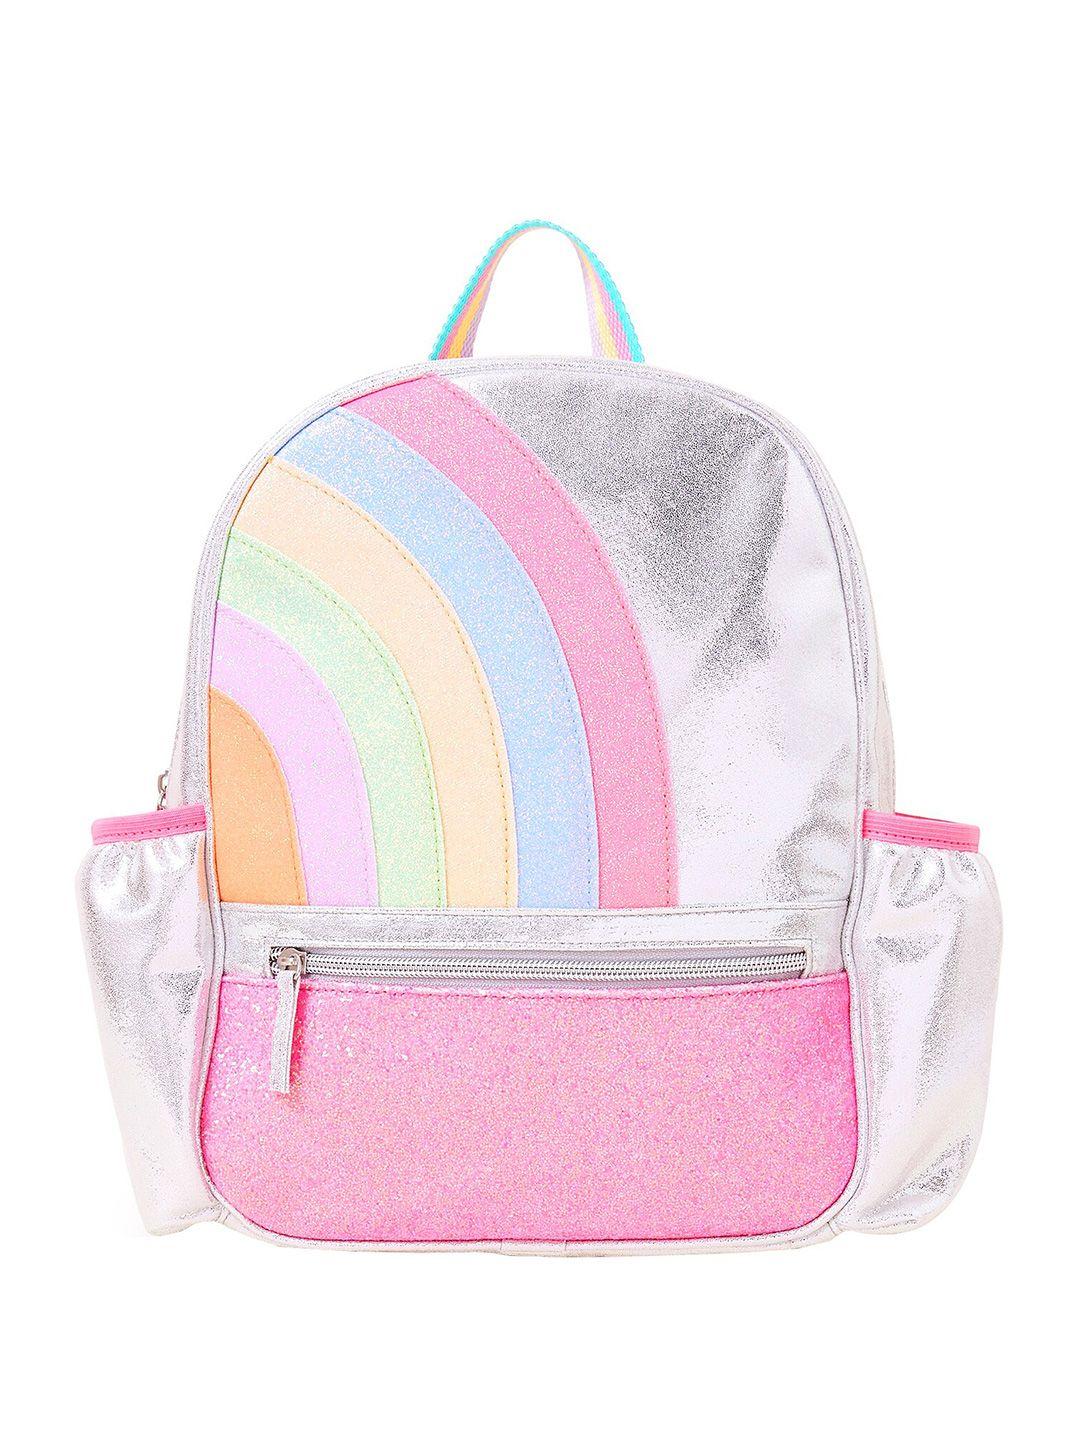 accessorize girls blue & pink geometric applique backpack